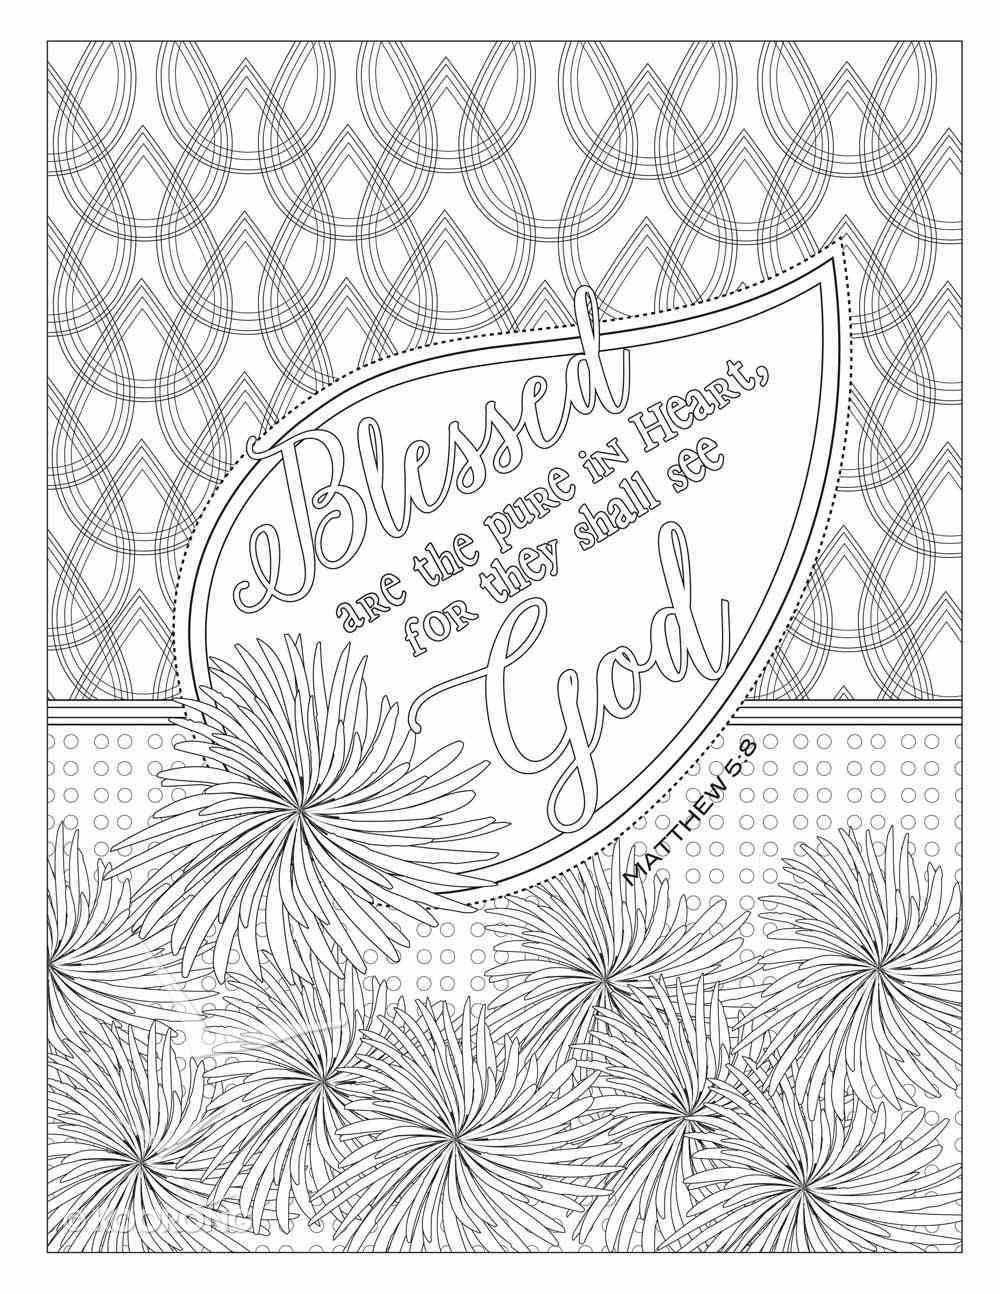 Download Color The Words Of Jesus Coloring Book For Your Soul Adult Coloring Books Series By Marie Michaels Illus Koorong